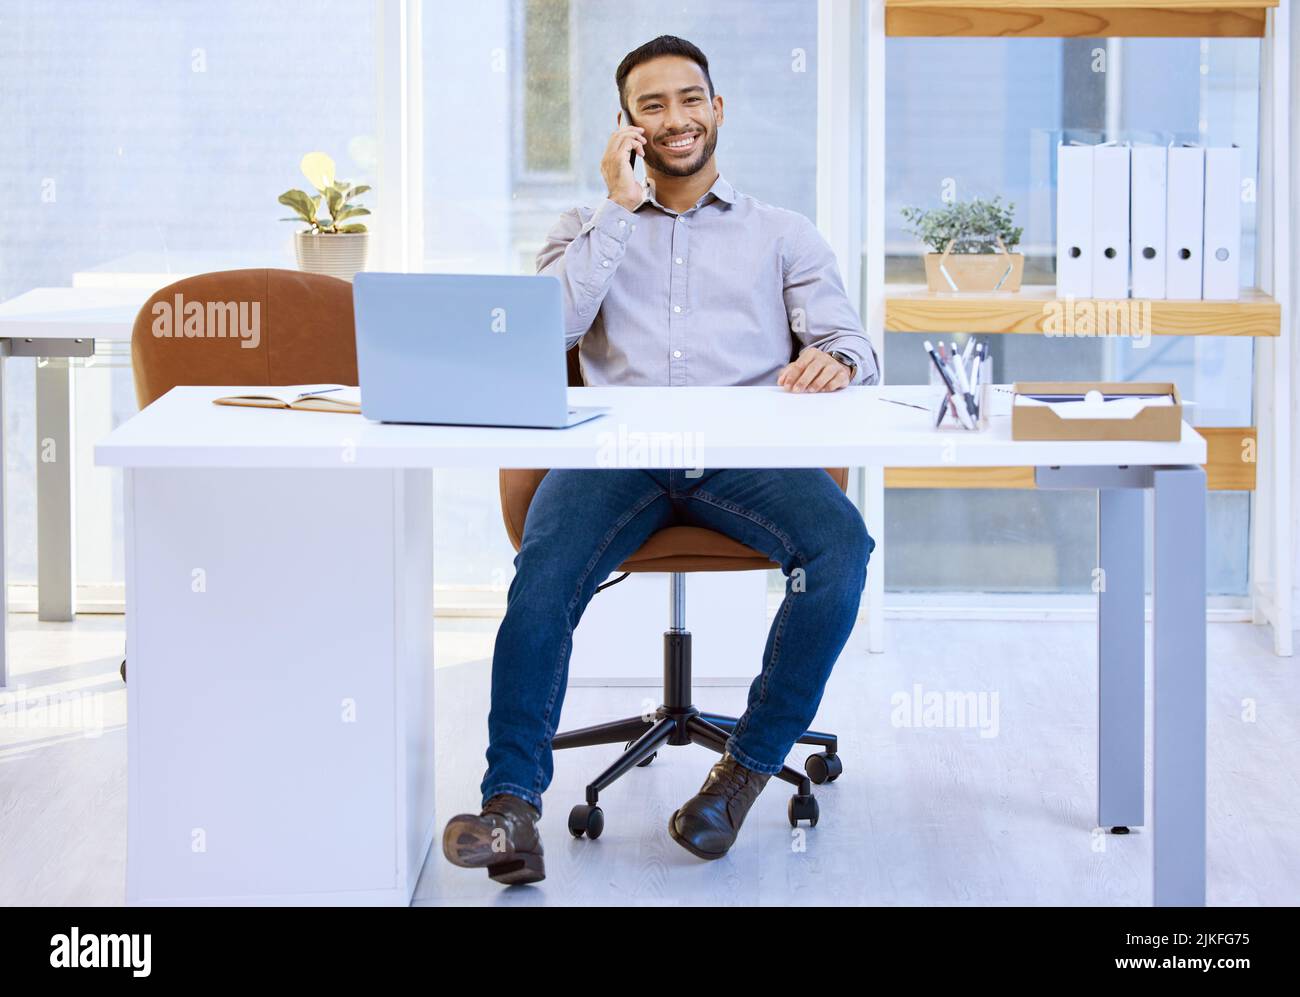 You dont wait for opportunities to come your way, you go scouting for it. a businessman talking on his cellphone while sitting at his desk. Stock Photo